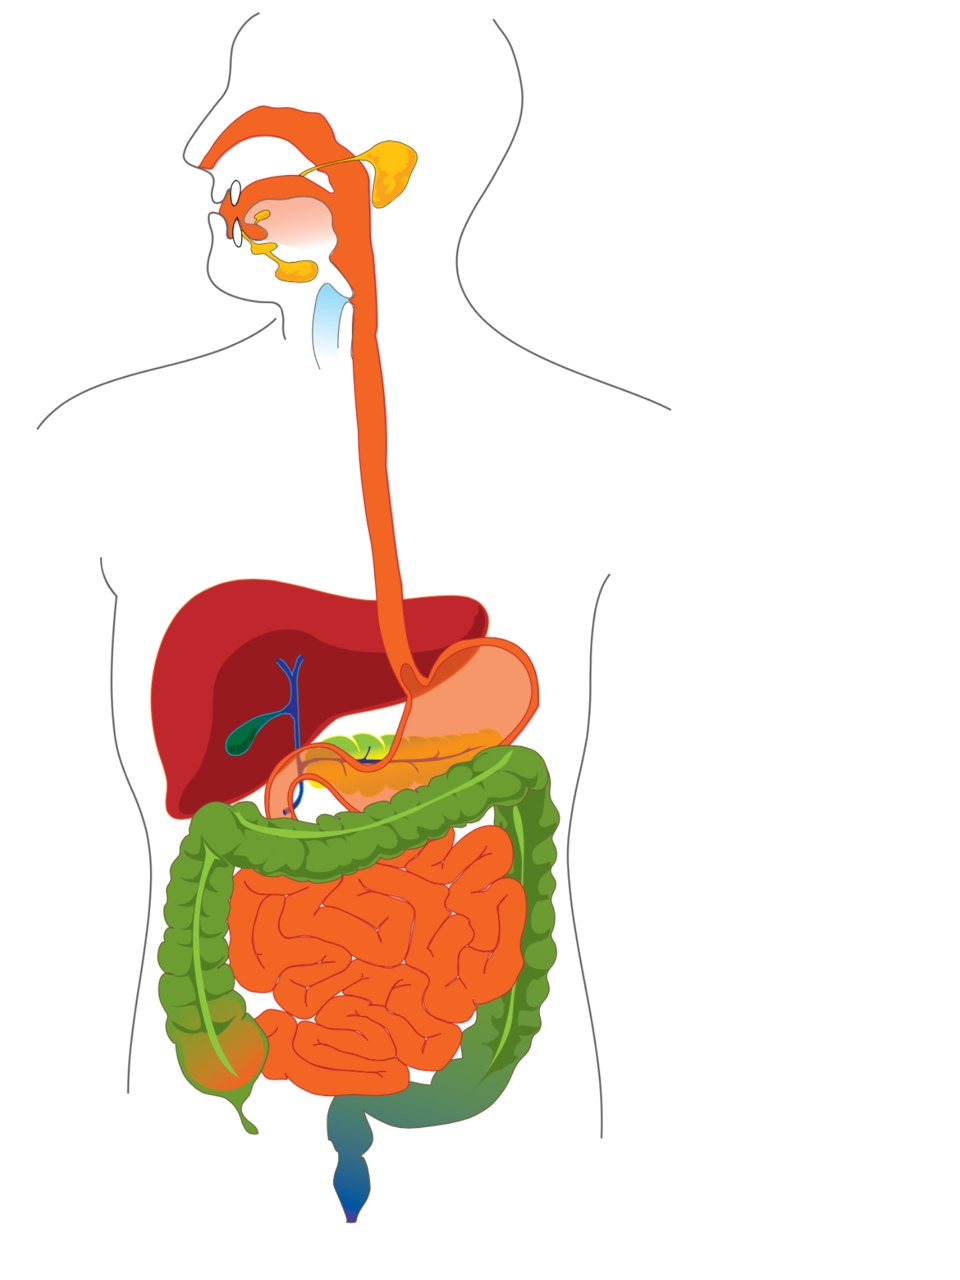 THE DIGESTIVE SYSTEN - ThingLink